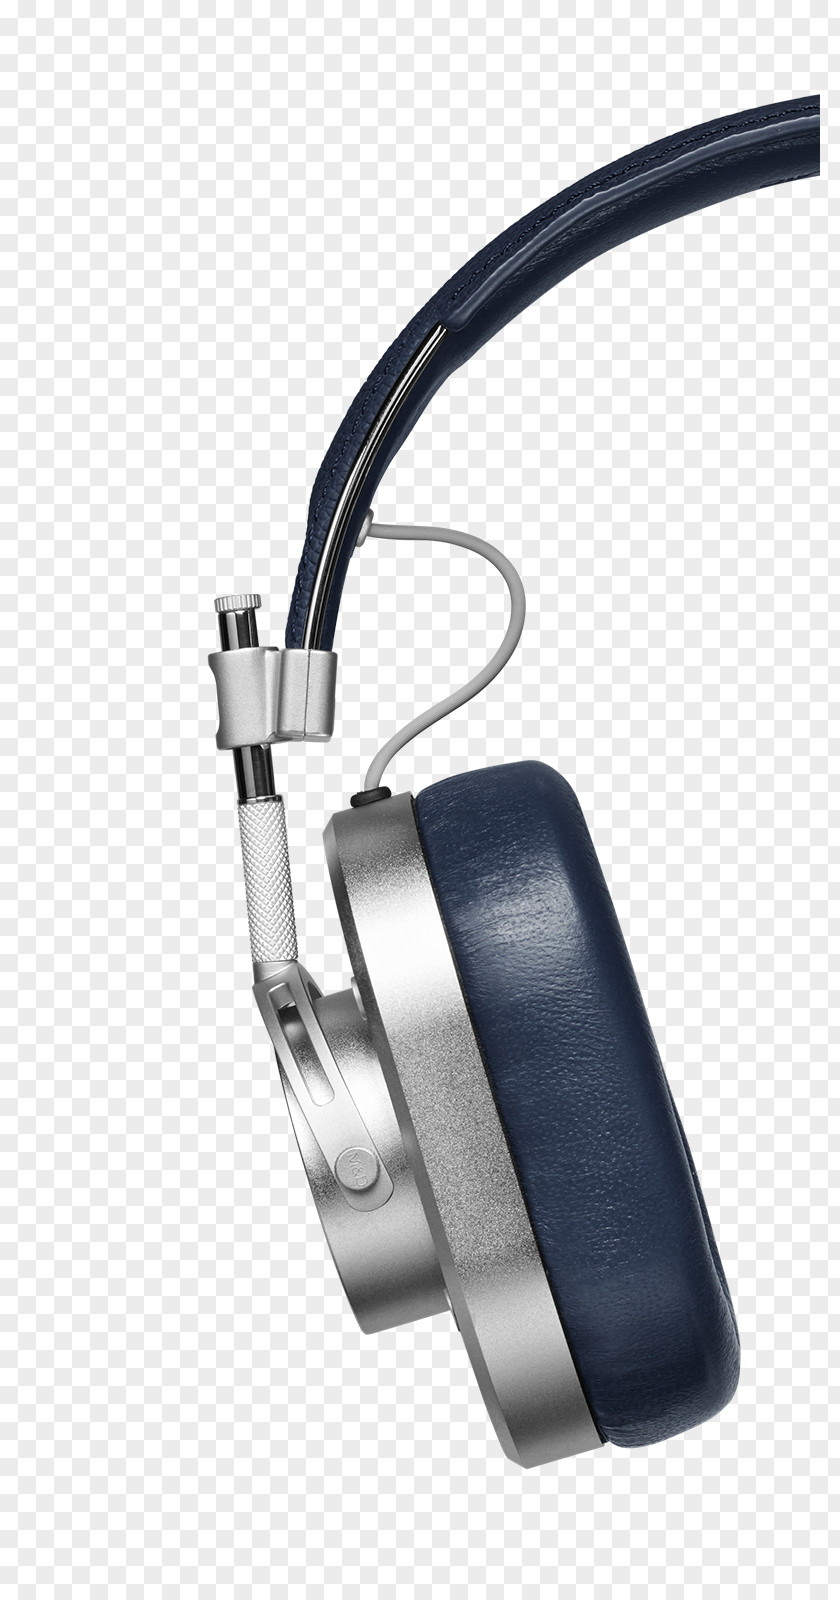 Silver Microphone Headphones Ear Sound Material PNG